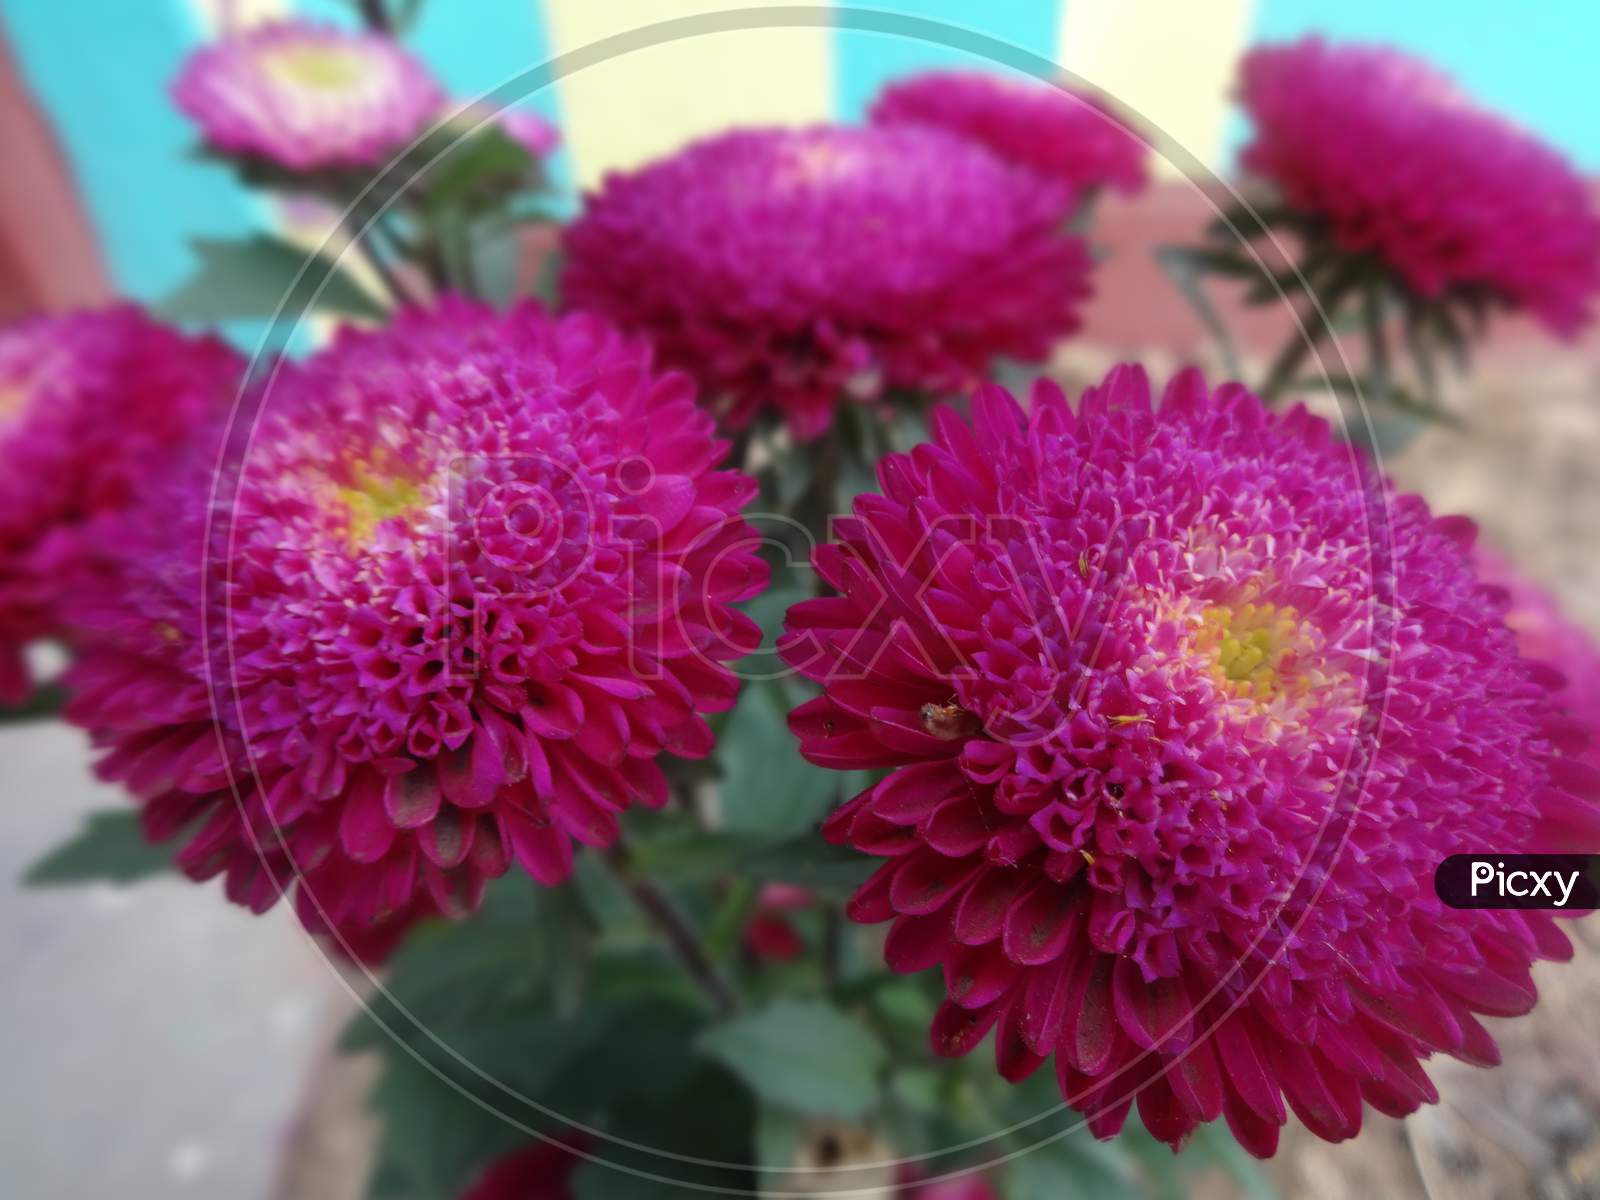 Pink chrysanths floral design china aster small flowering plant closeup image